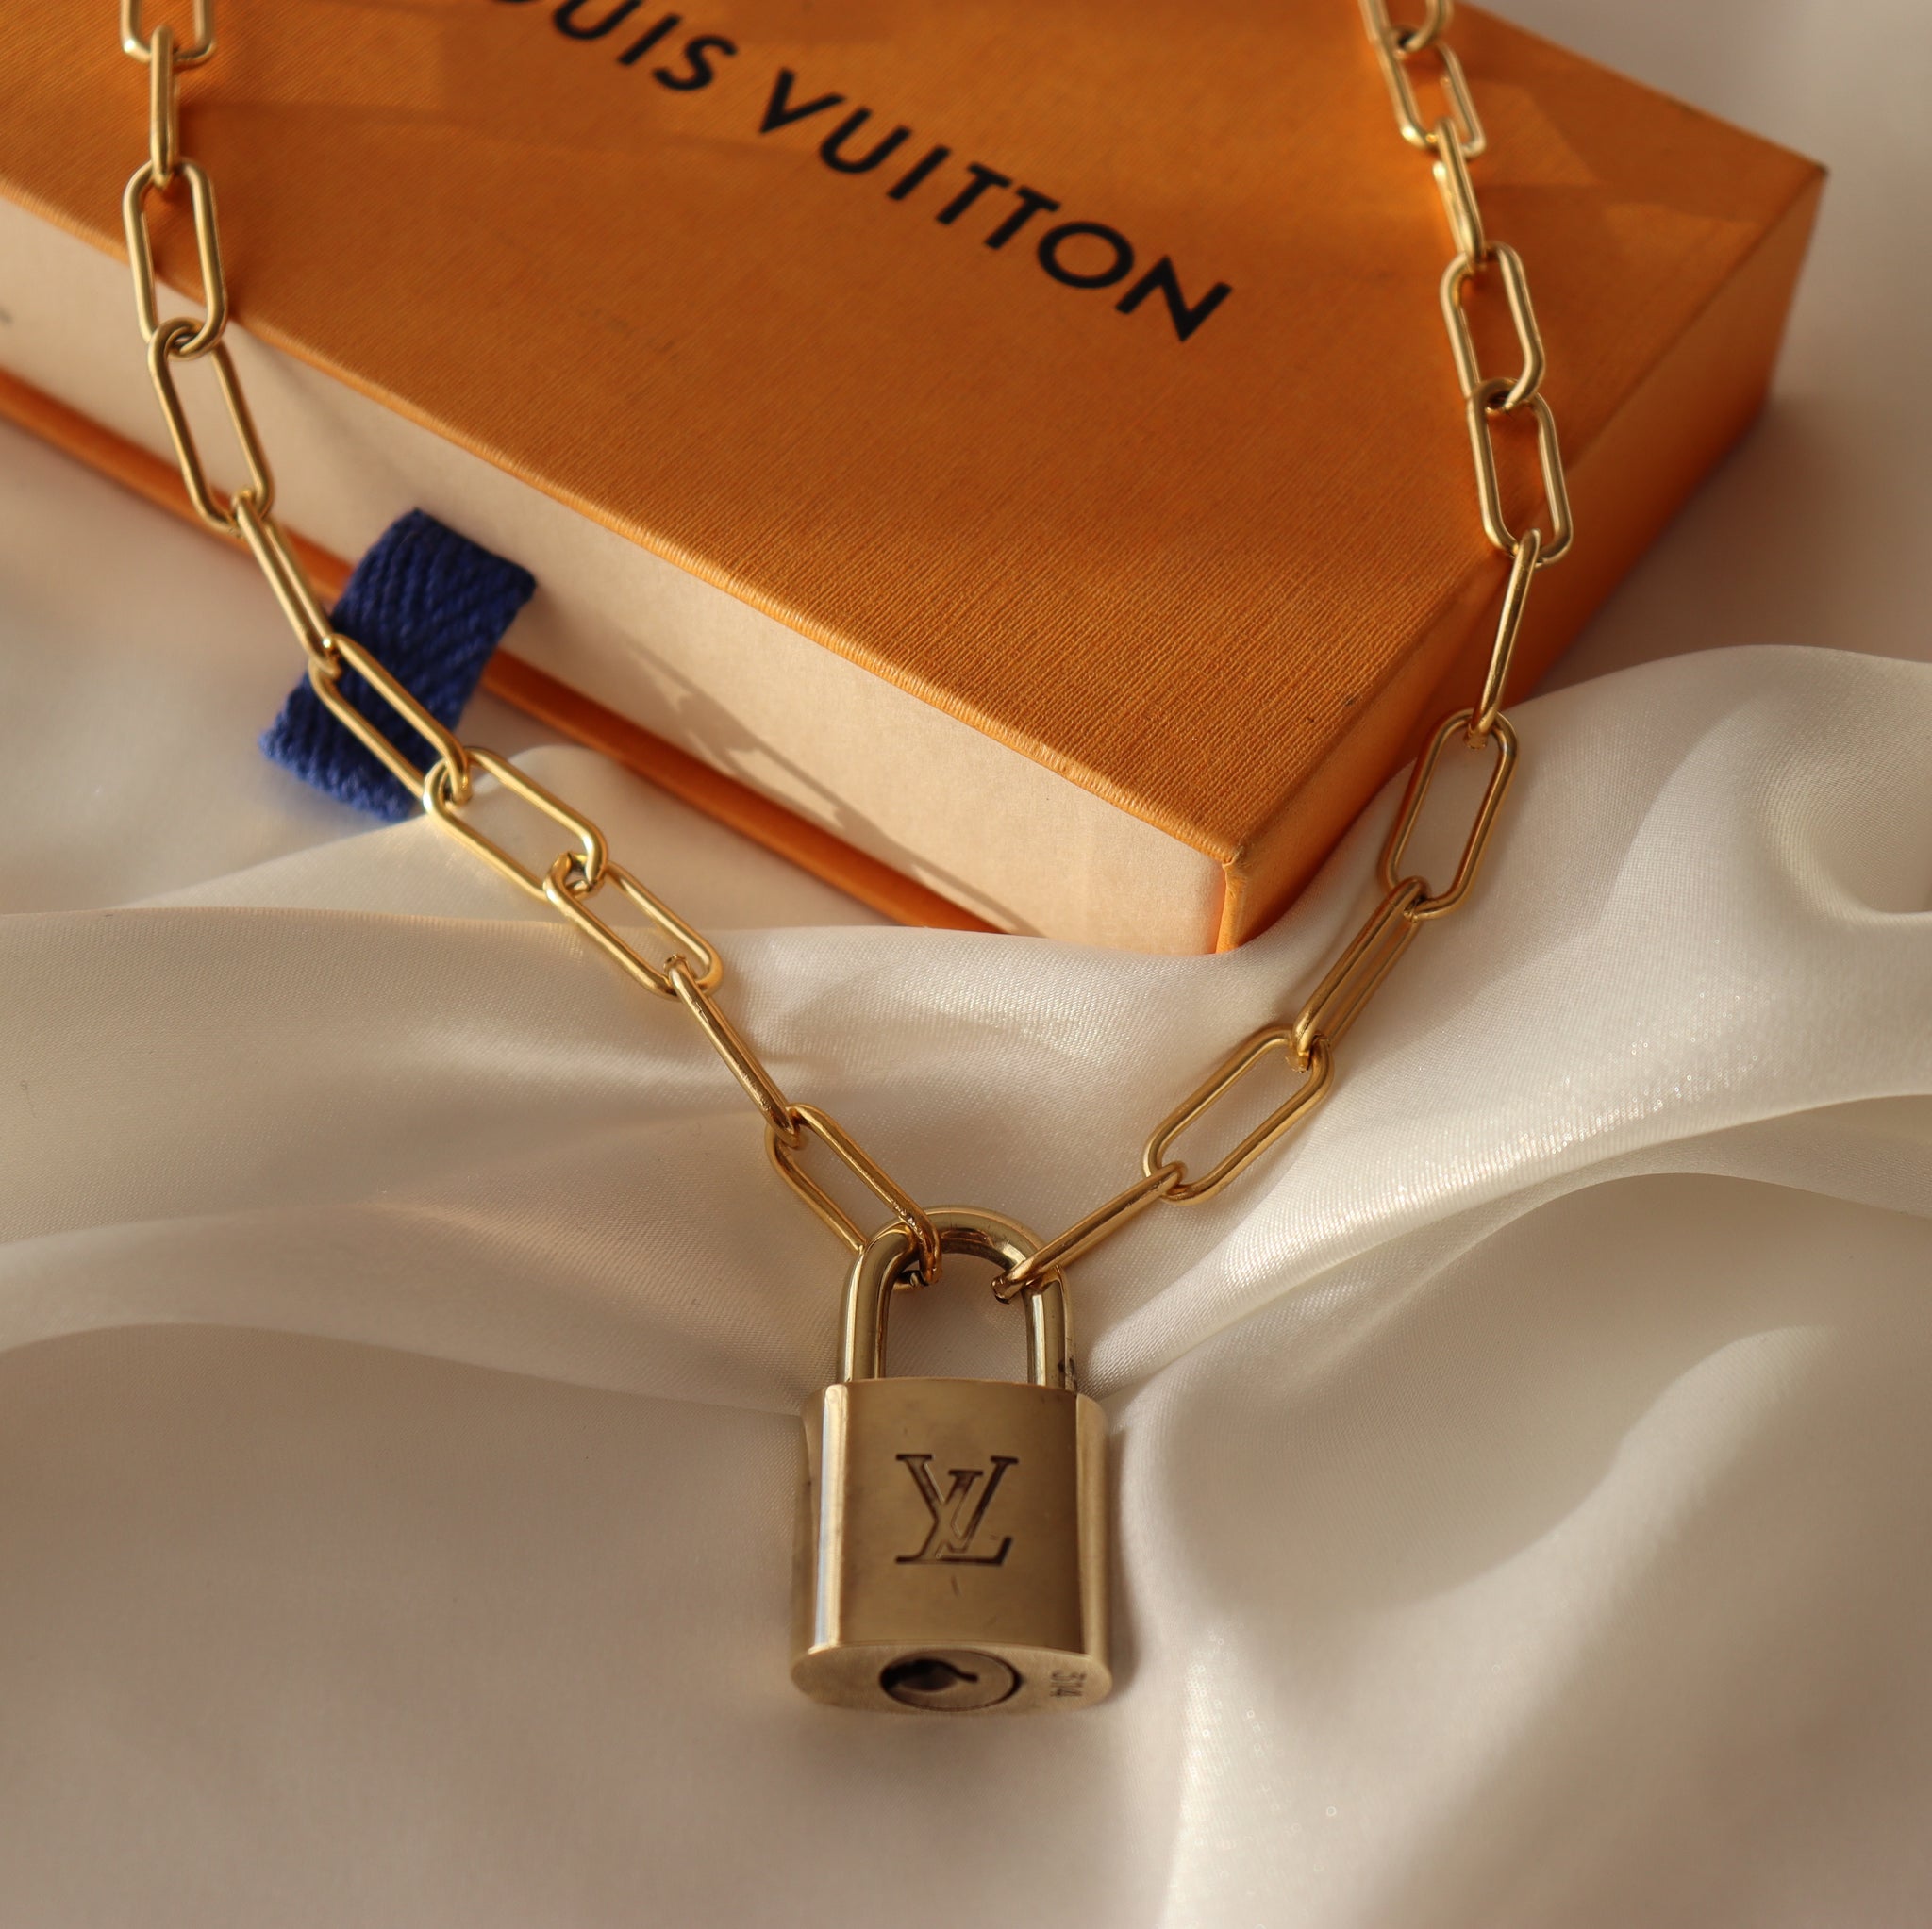 Sold at Auction: Louis Vuitton, Louis Vuitton Pink enamelled spinning ball  pendant on chain